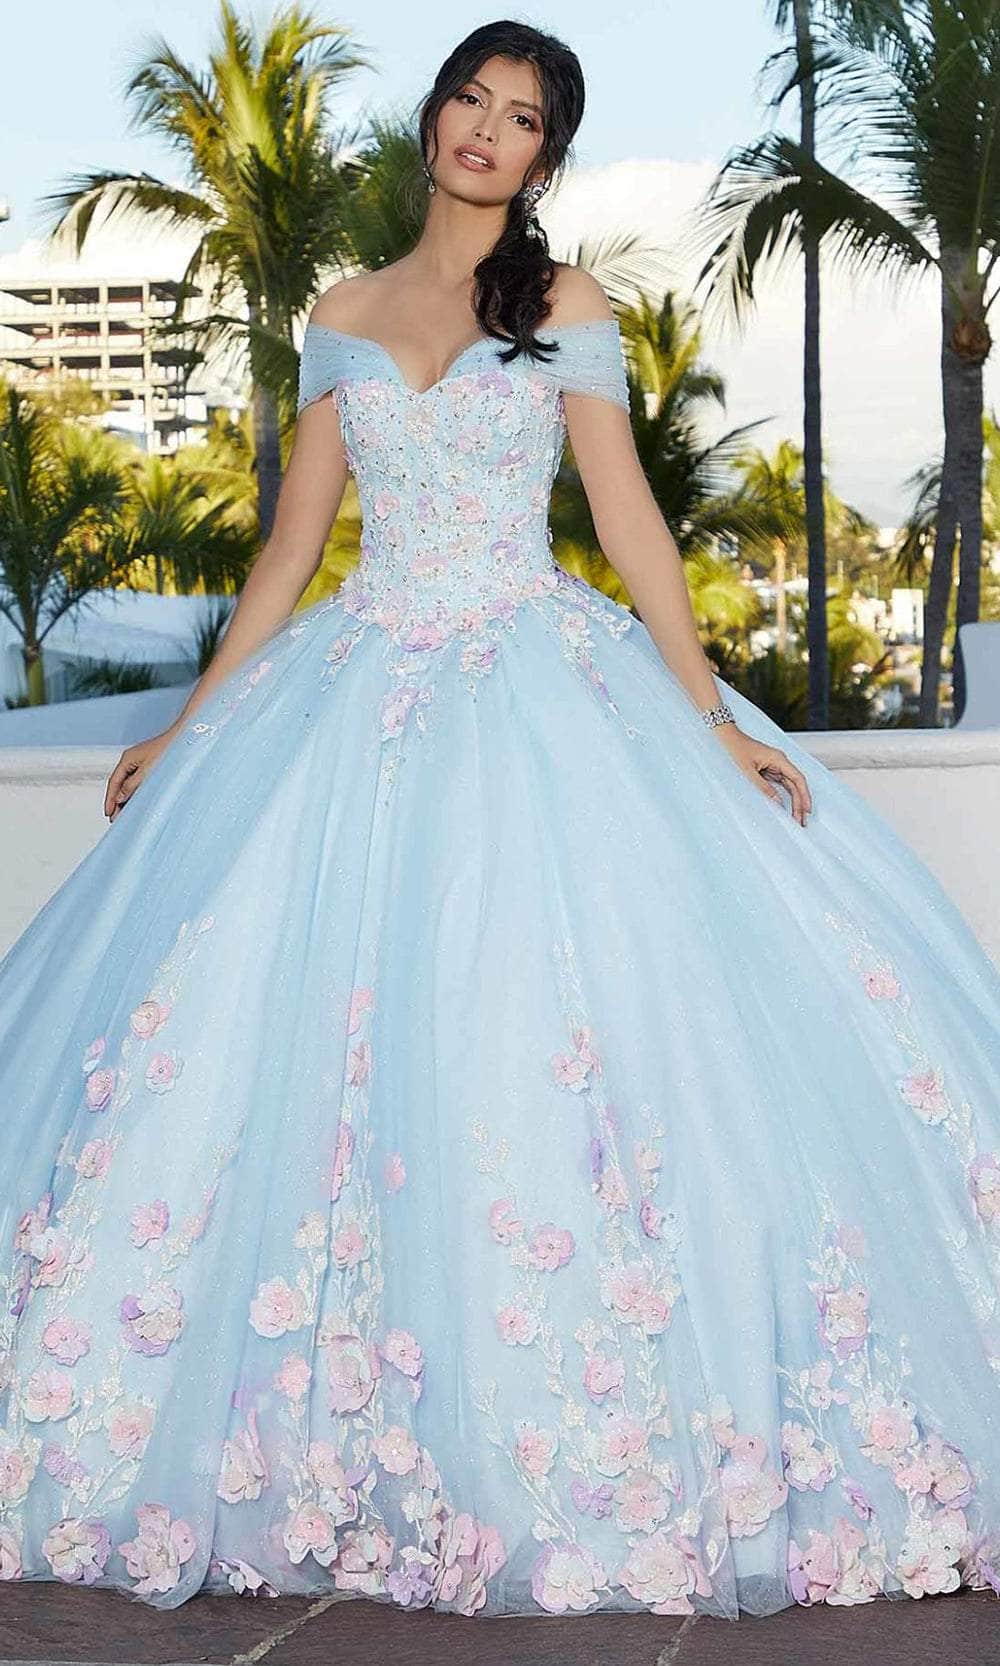 Image of Mori Lee 60165 - 3D Floral Appliqued Sweetheart Ballgown